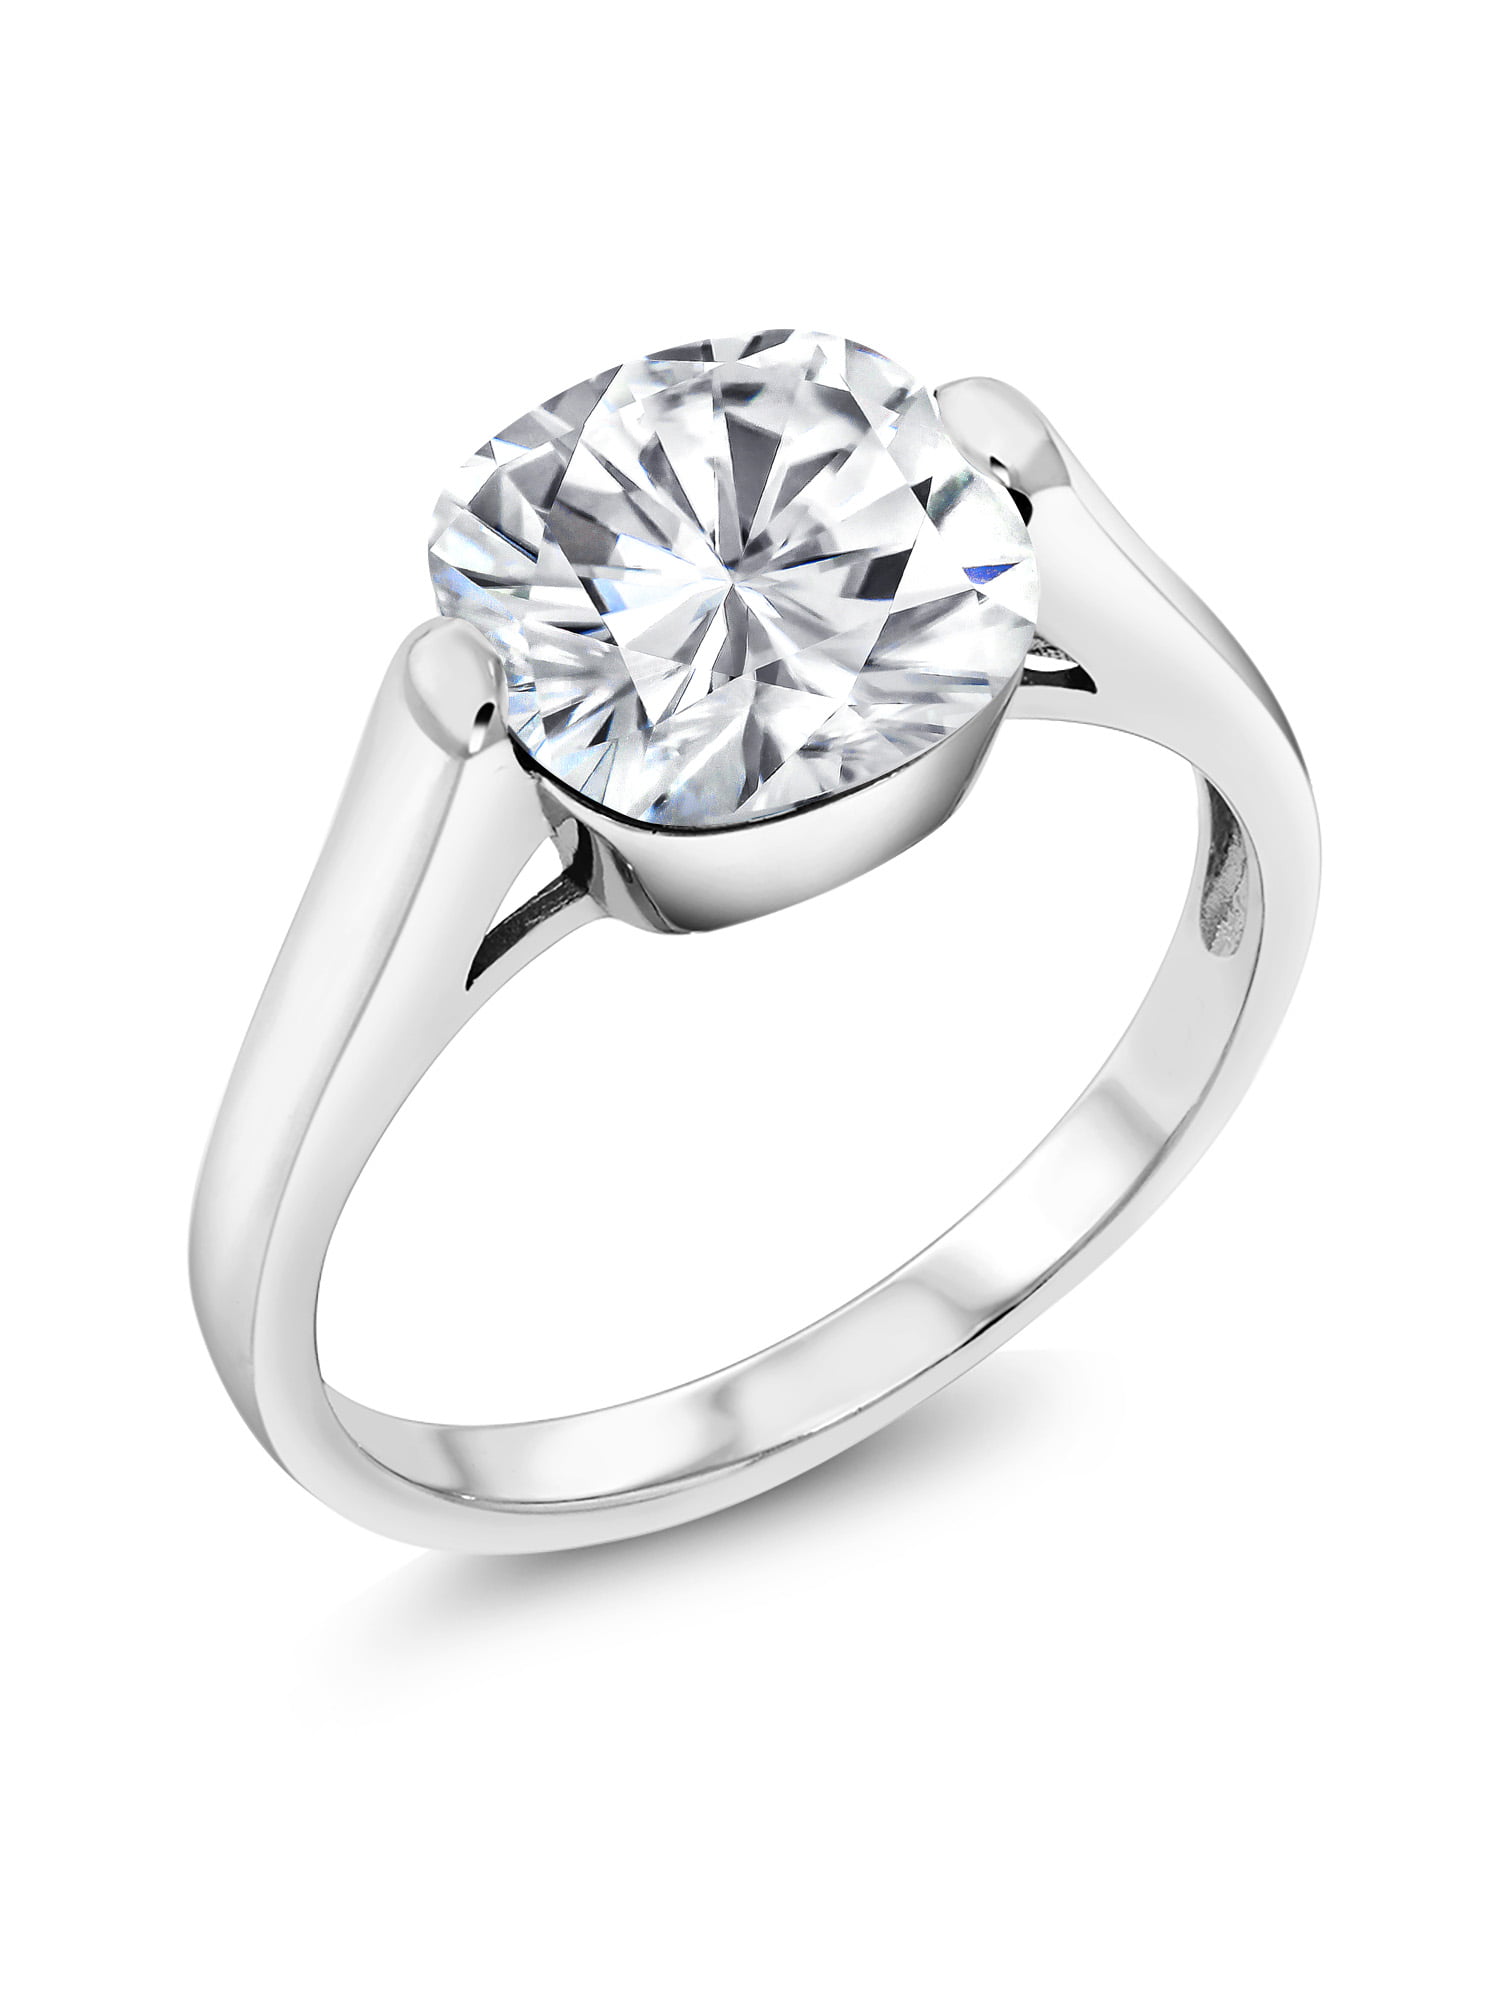 D-Color Cushion Shape 2.80 Carat Solitaire Women's Ring In 925 Sterling Silver